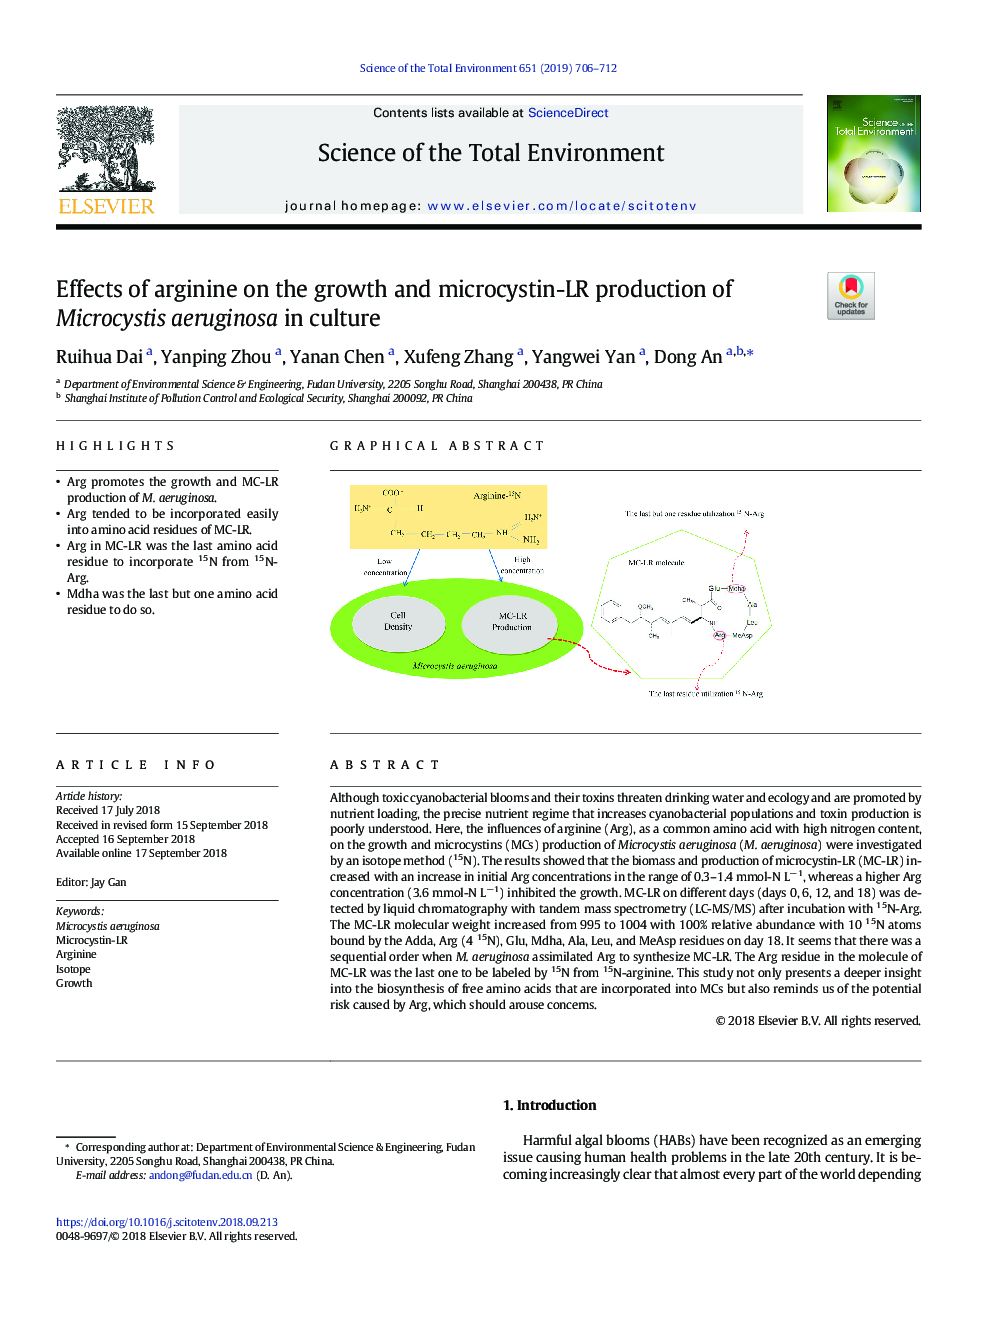 Effects of arginine on the growth and microcystin-LR production of Microcystis aeruginosa in culture